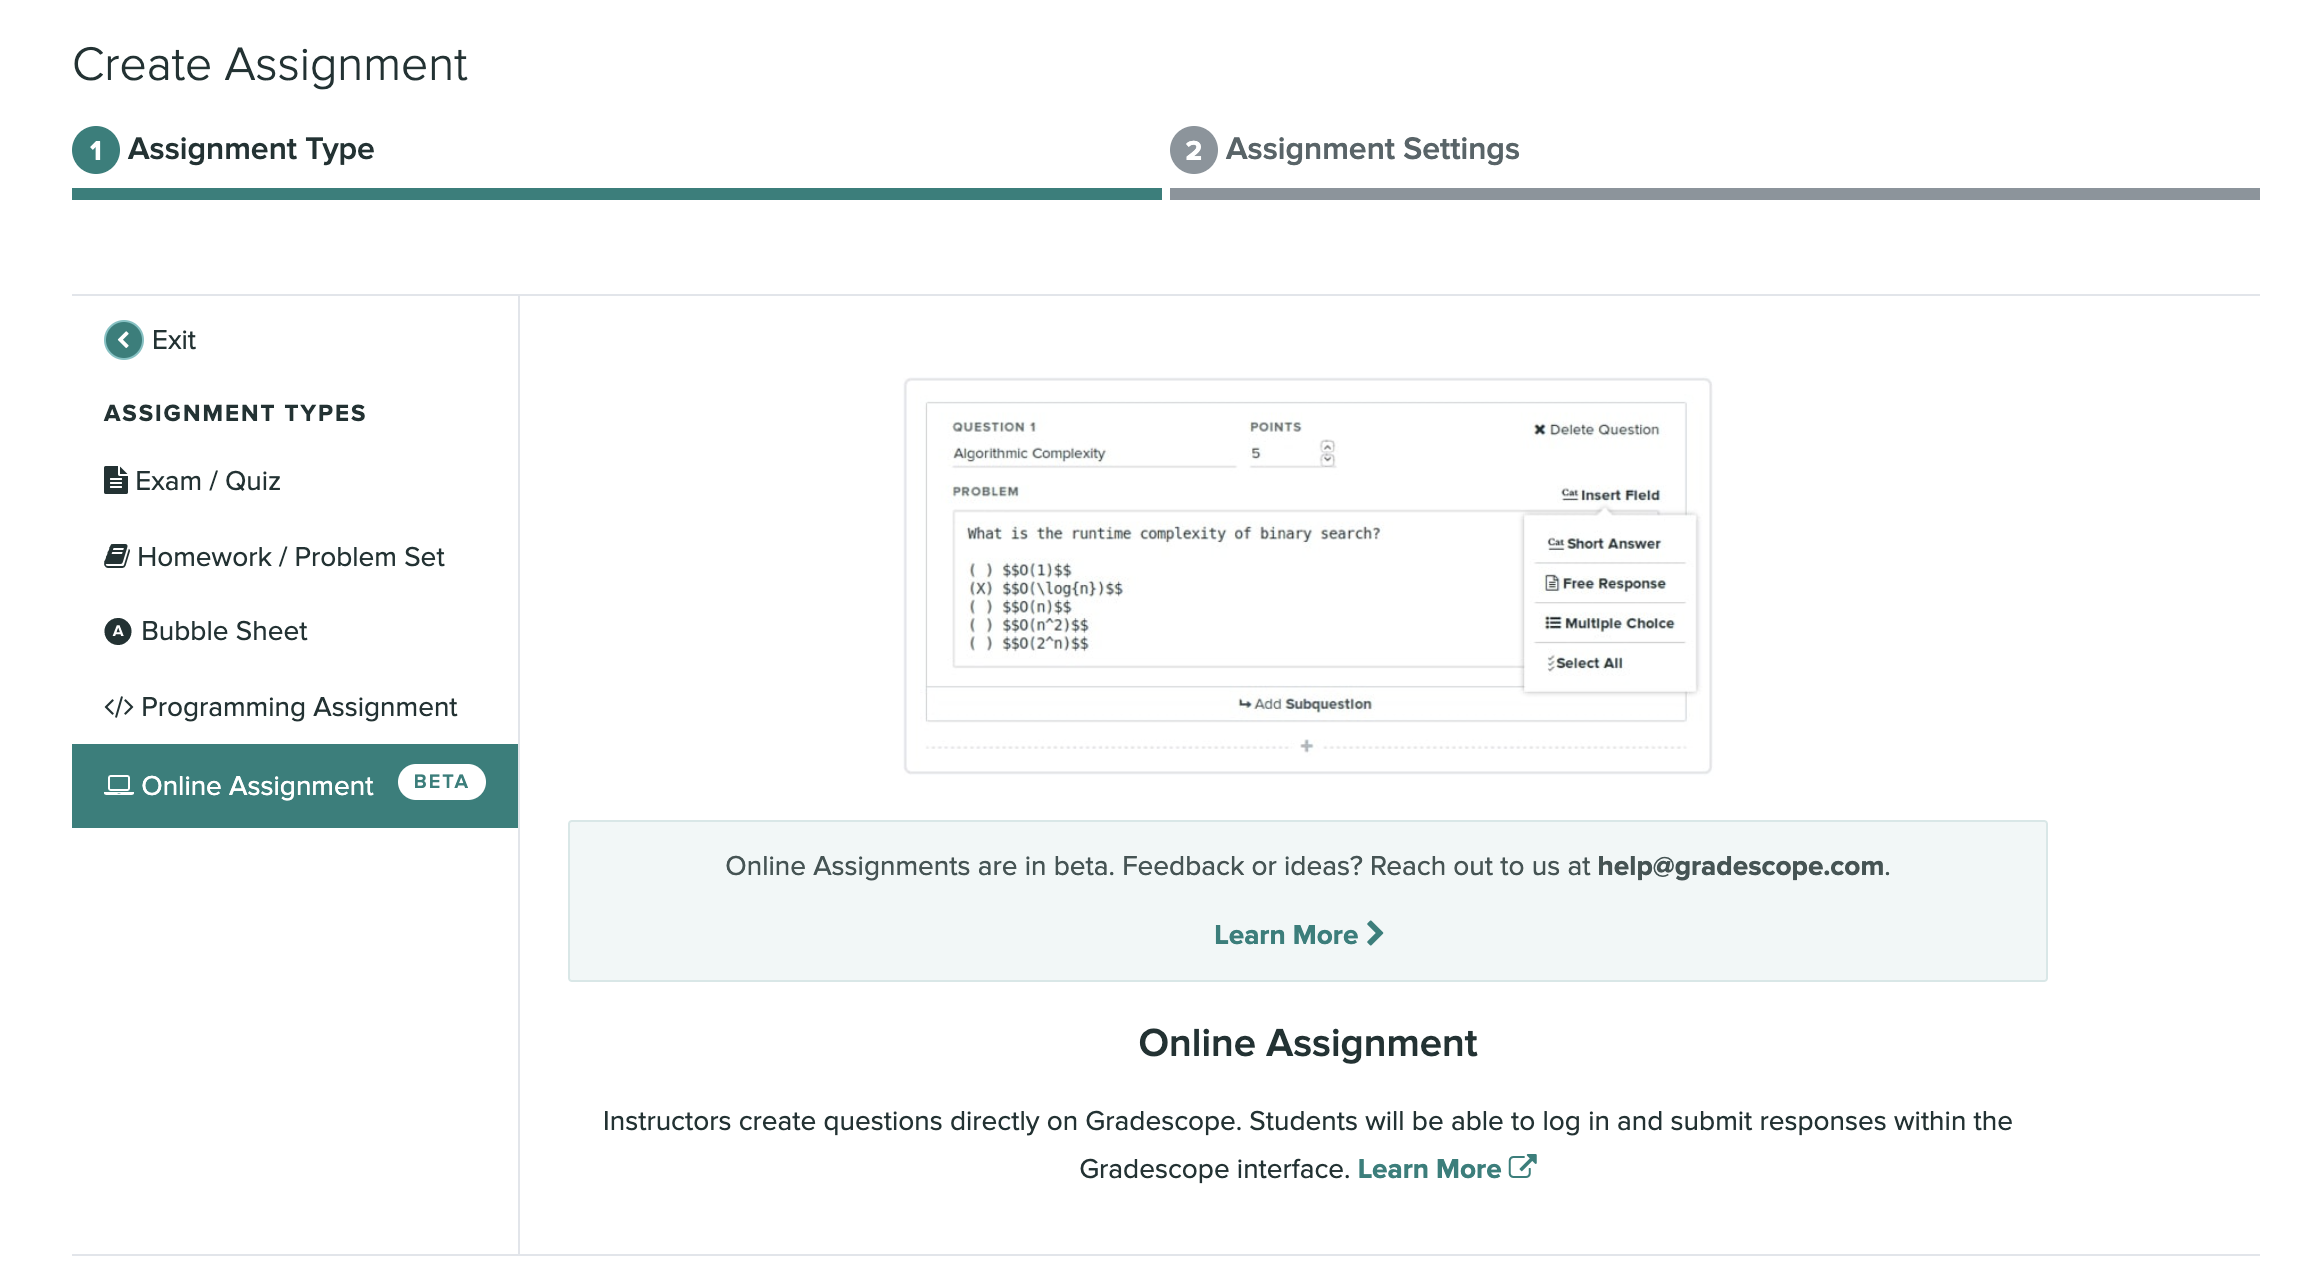 A screen capture of the create assignment page with the online assignment type selected.